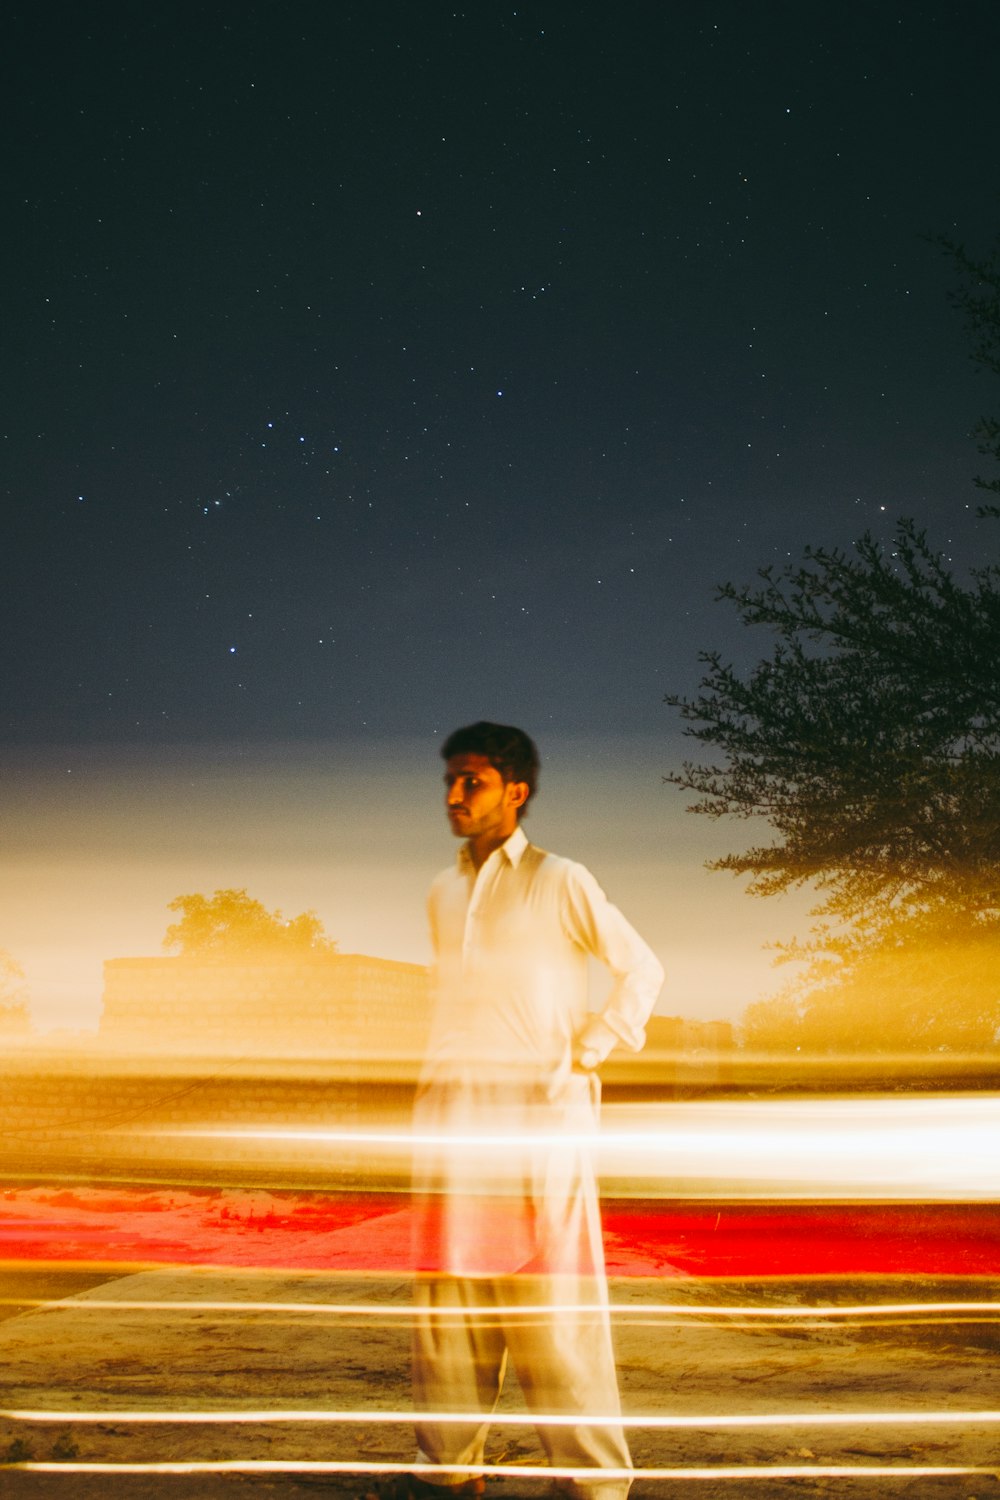 man in white dress shirt standing near body of water during night time